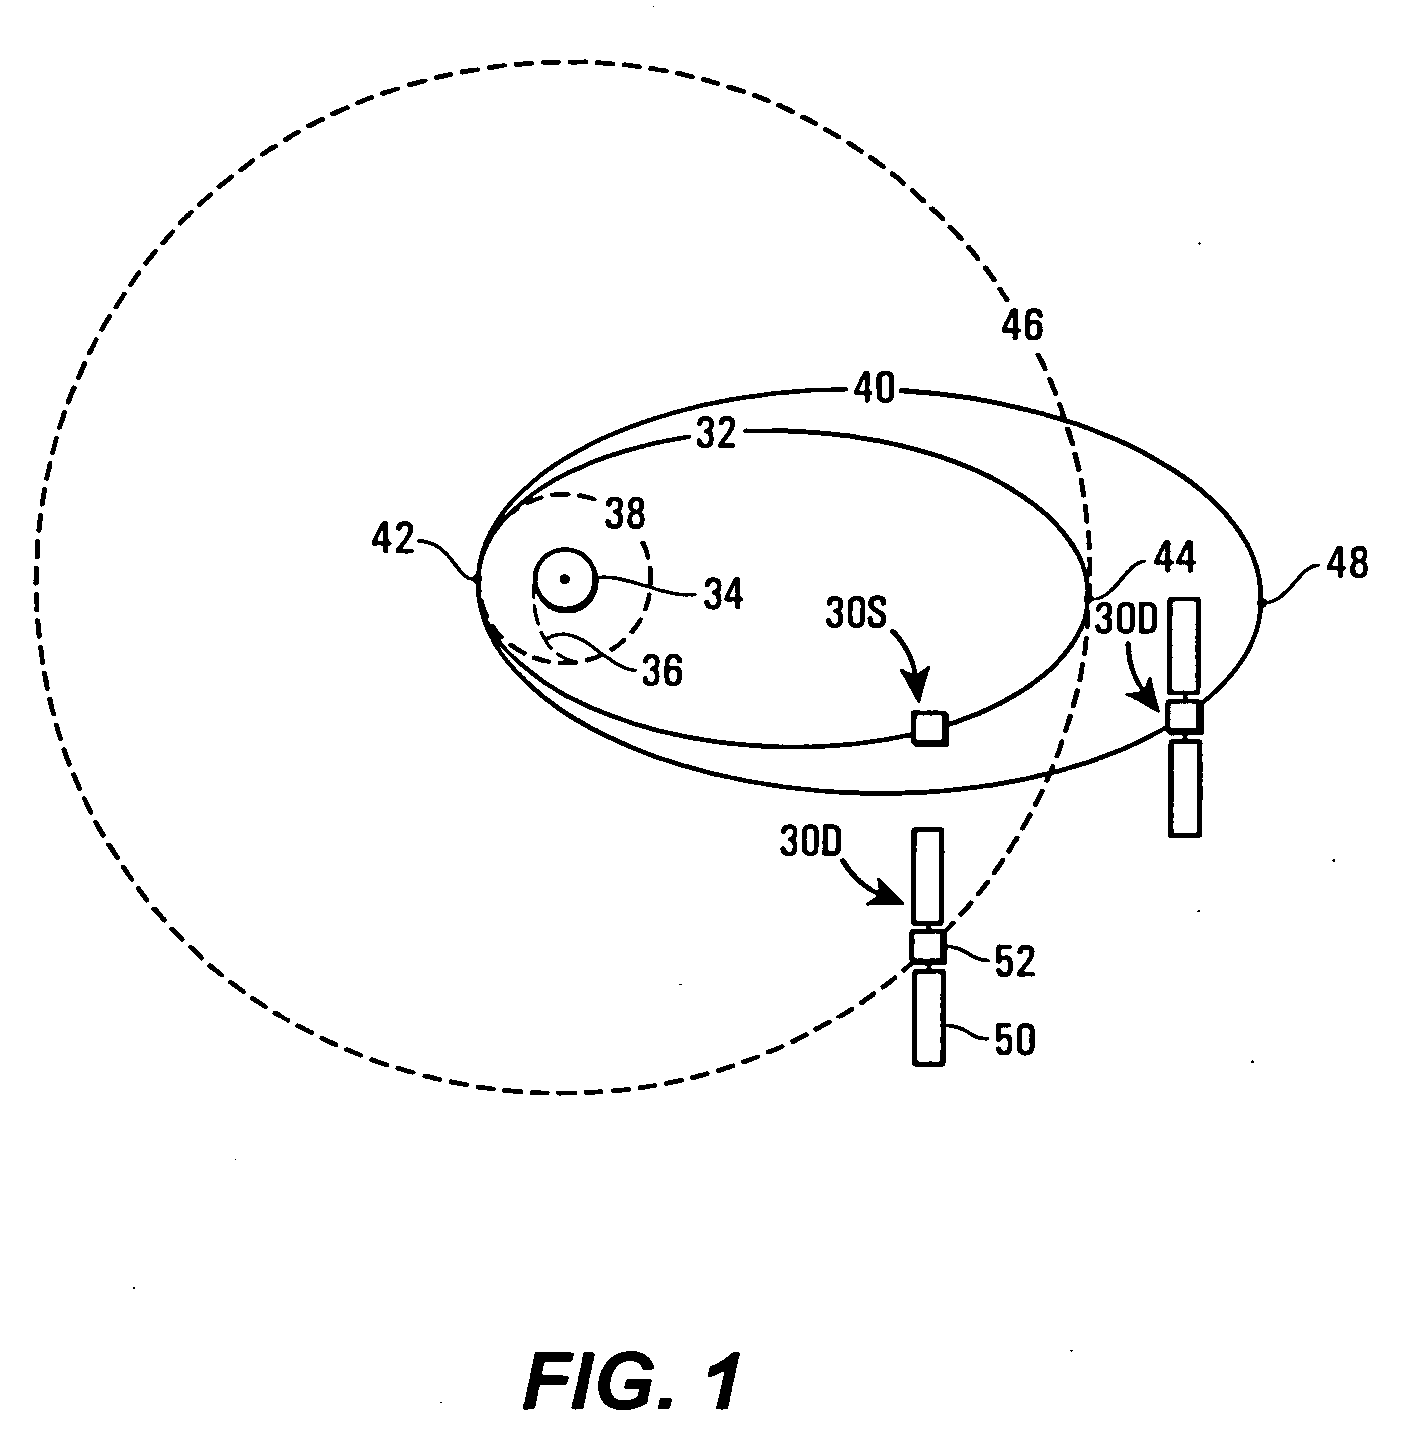 Unified attitude control for spacecraft transfer orbit operations